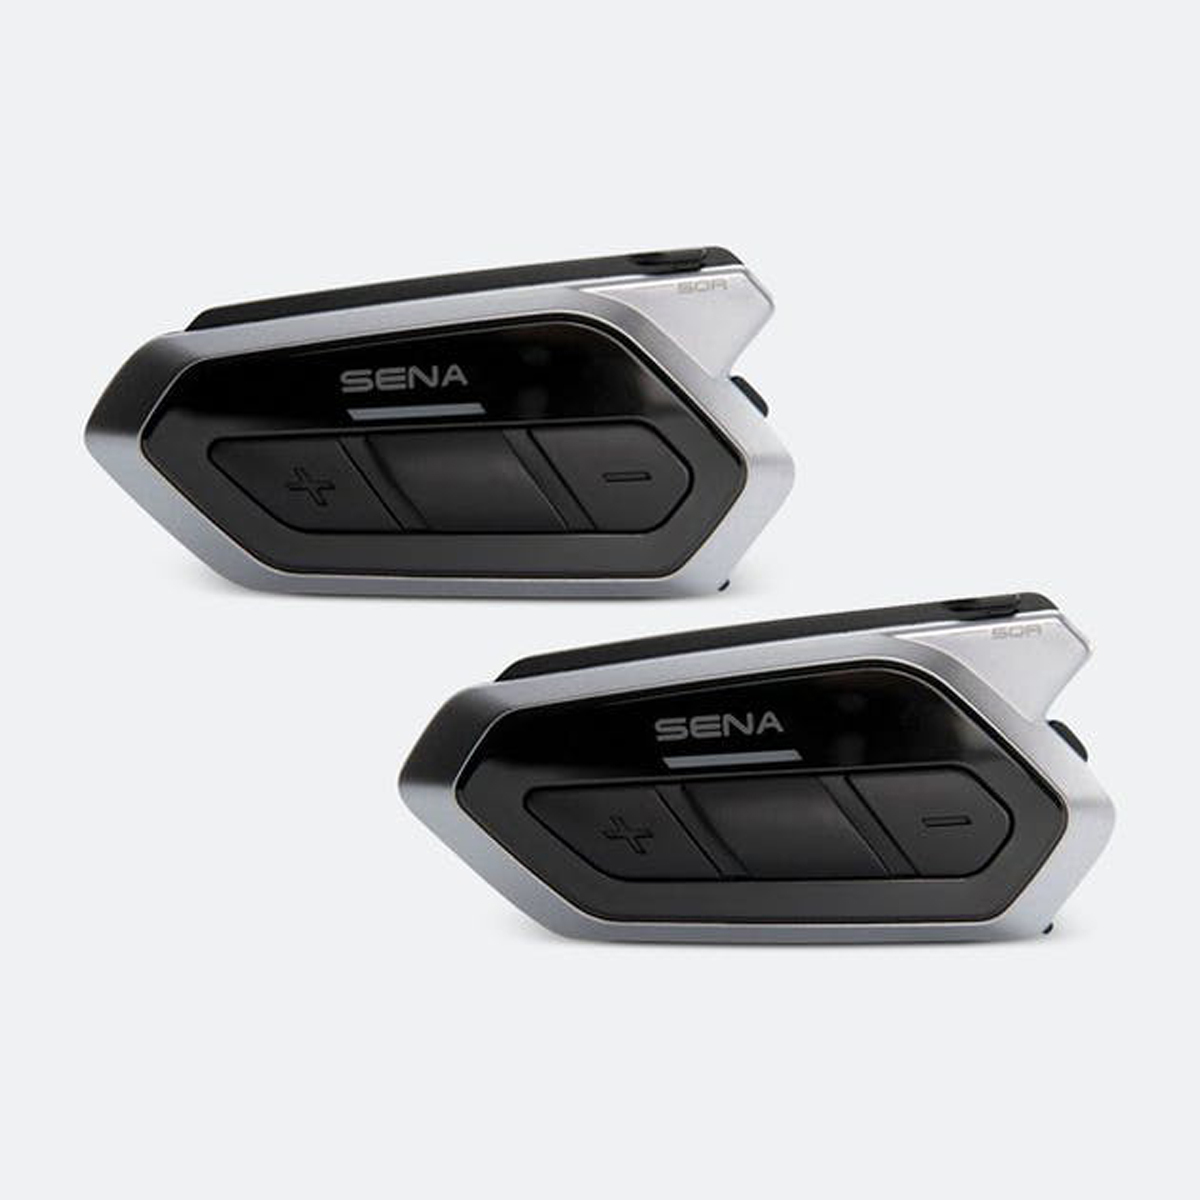 SENA Motorcycle Bluetooth Mesh Communication System 50R-02D Dual Pack ::  £521.10 :: Motorcycle Helmets :: CAMERAS  BLUETOOTH INTERCOMS ::  WHATEVERWHEELS LTD ATV, Motorbike  Scooter Centre Lancashire's Best For